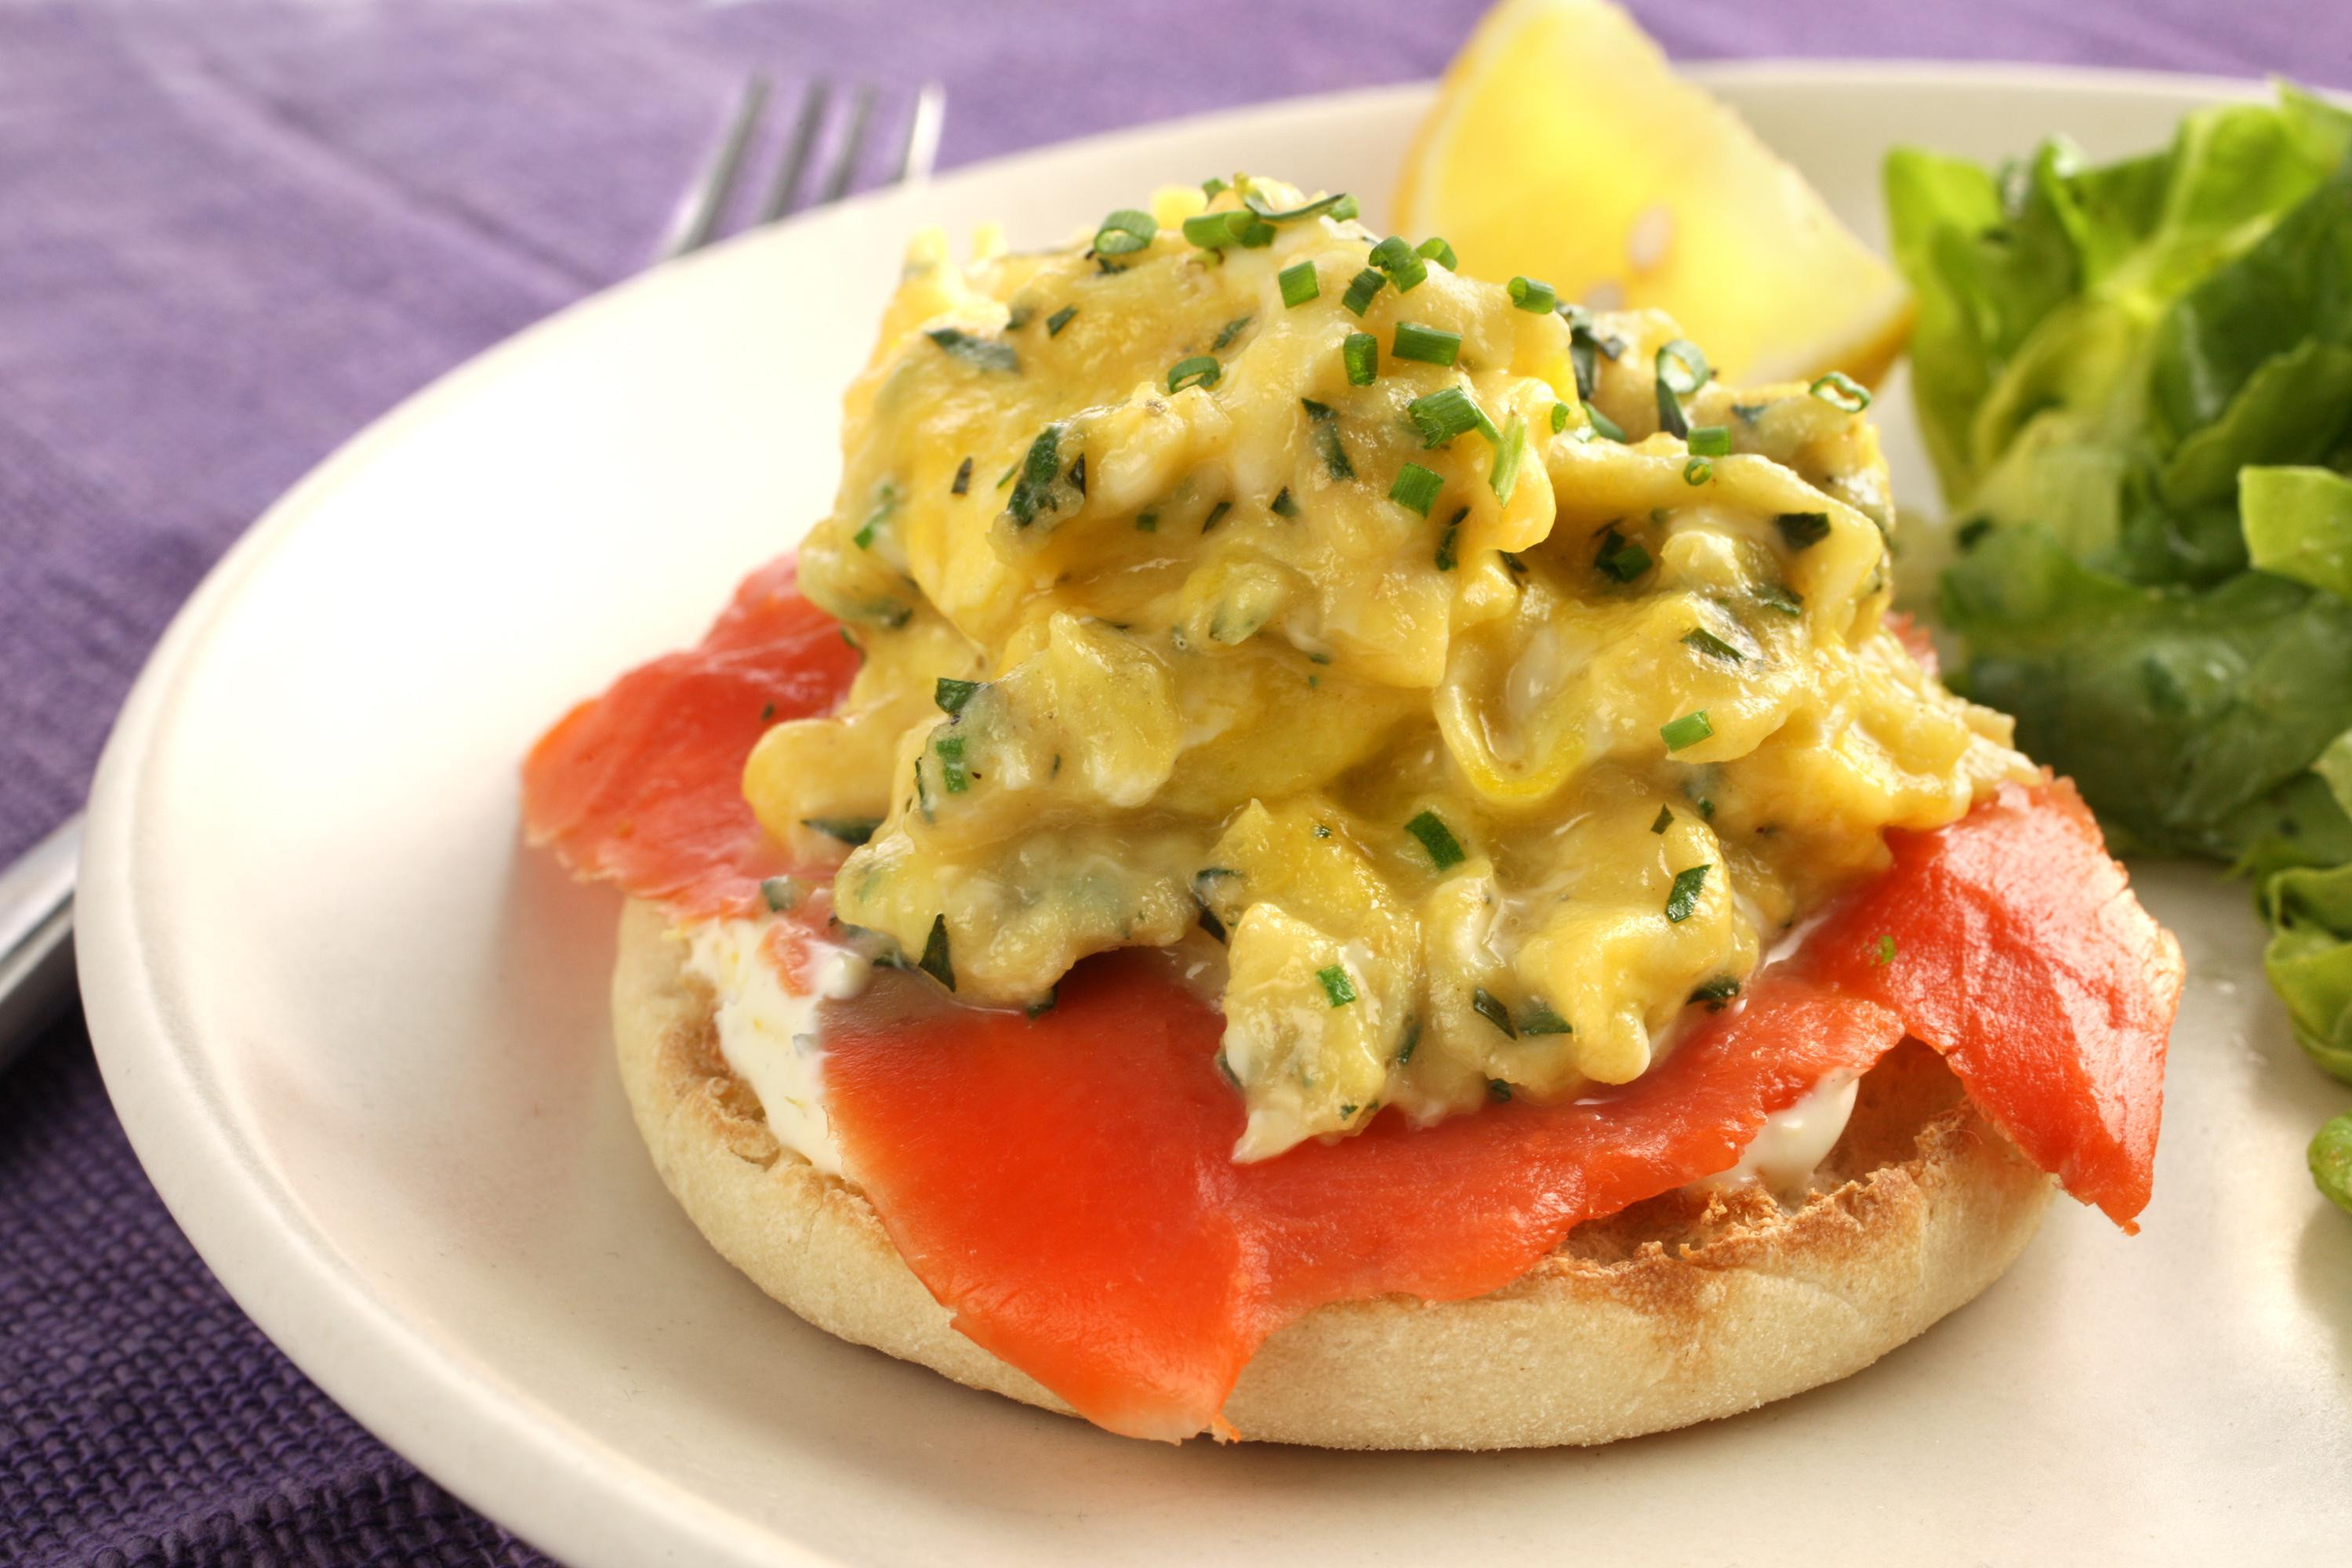 Smoked Salmon Brunch Recipes
 Egg And Smoked Salmon Open Faced Breakfast Sandwich Recipe